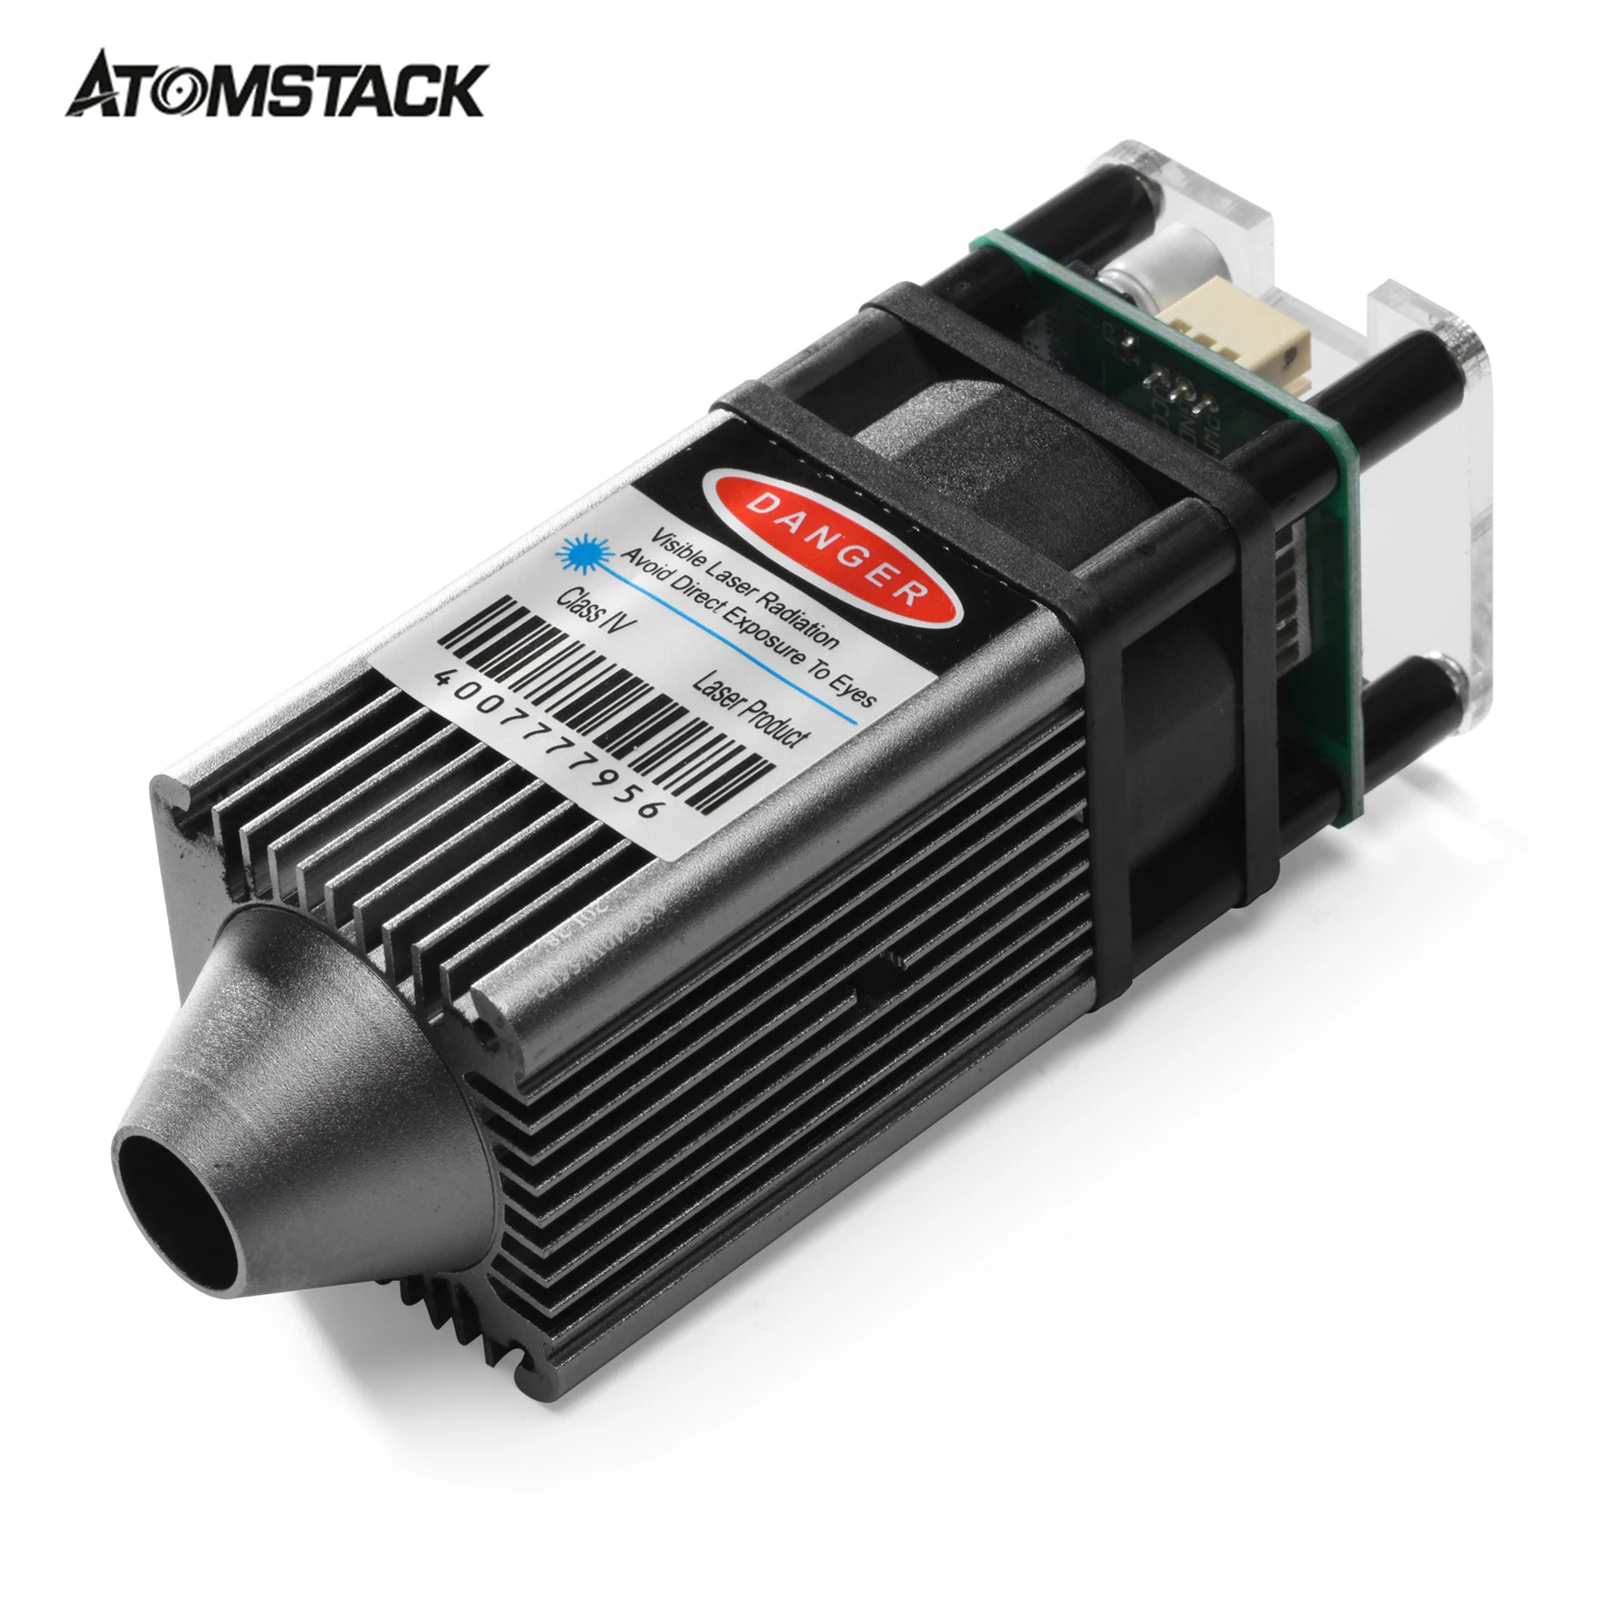 

ATOMSTACK 40W 450nm Laser Module Eye Protection Upgraded Fixed-focus Laser Head Compatible with ATOMSTACK CNC Laser Engraver